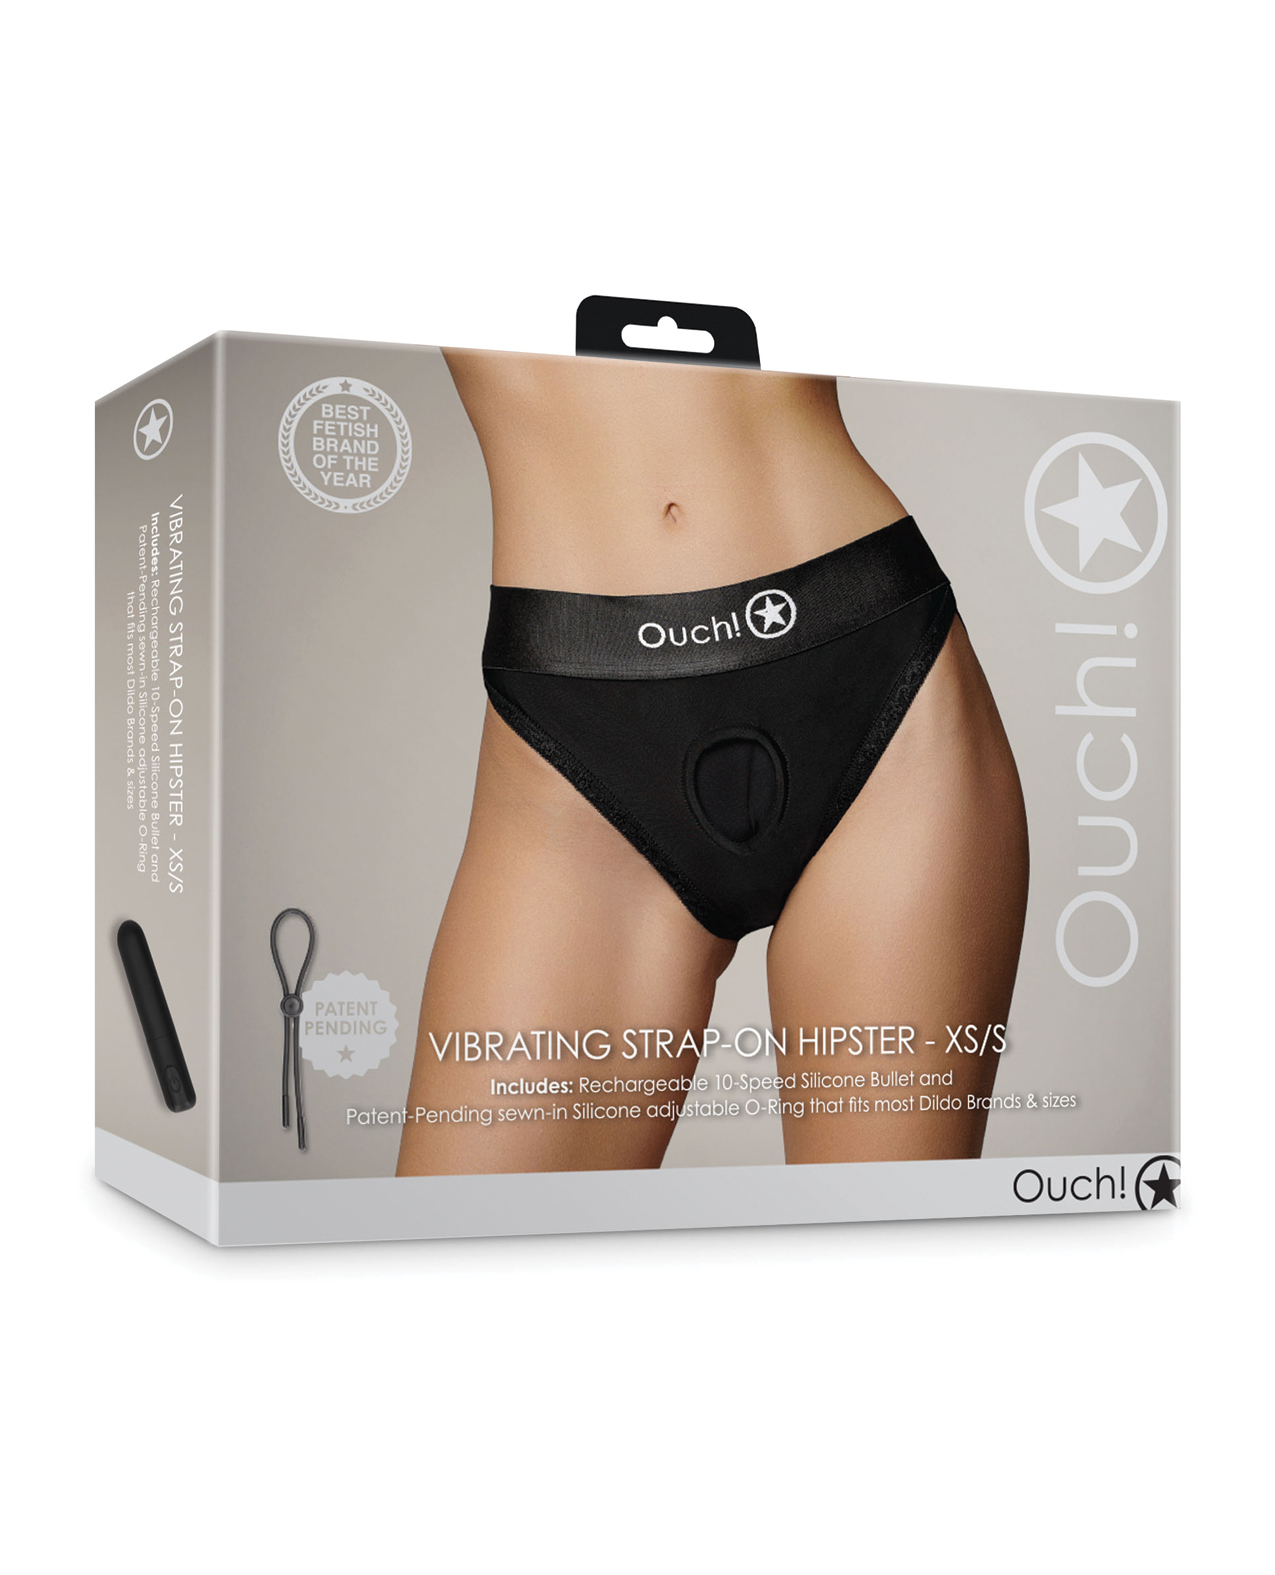 Shots Ouch Vibrating Strap On Hipster - Black XS/S